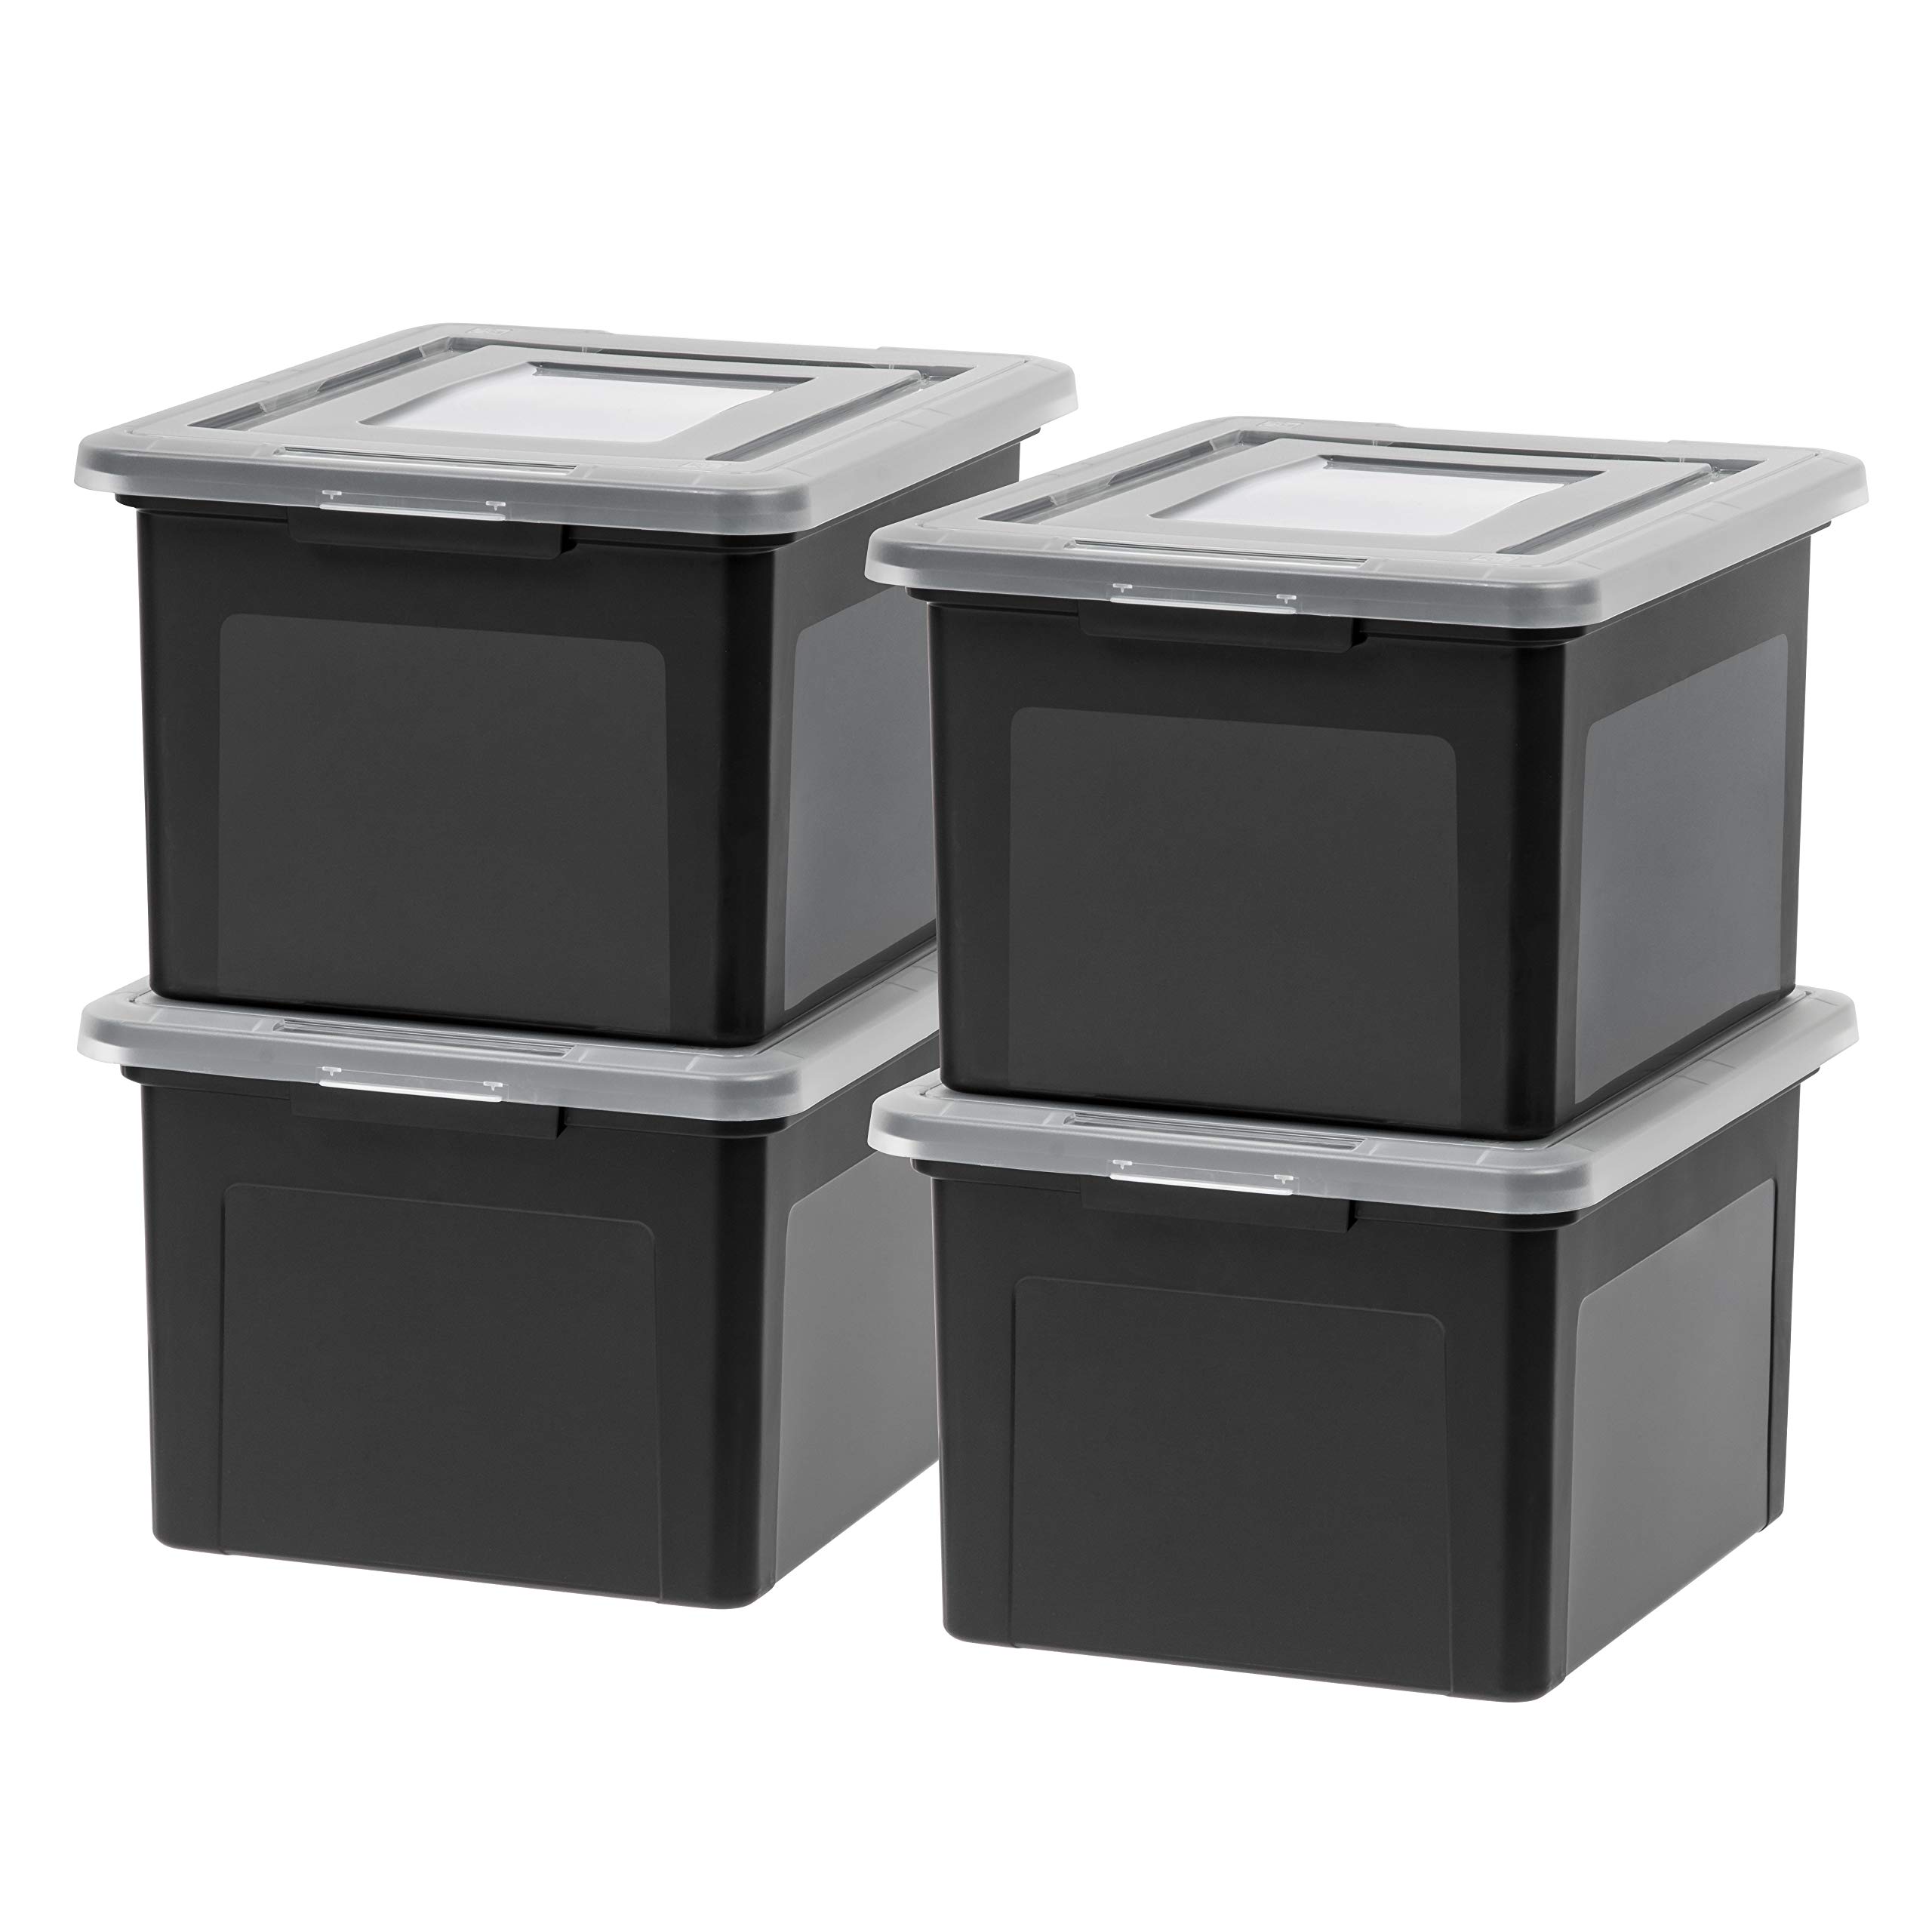 IRIS USA, Inc. IRIS USA Letter & Legal Size Plastic Storage Bin Tote Organizing File Box with Secure Latching Buckle Lid